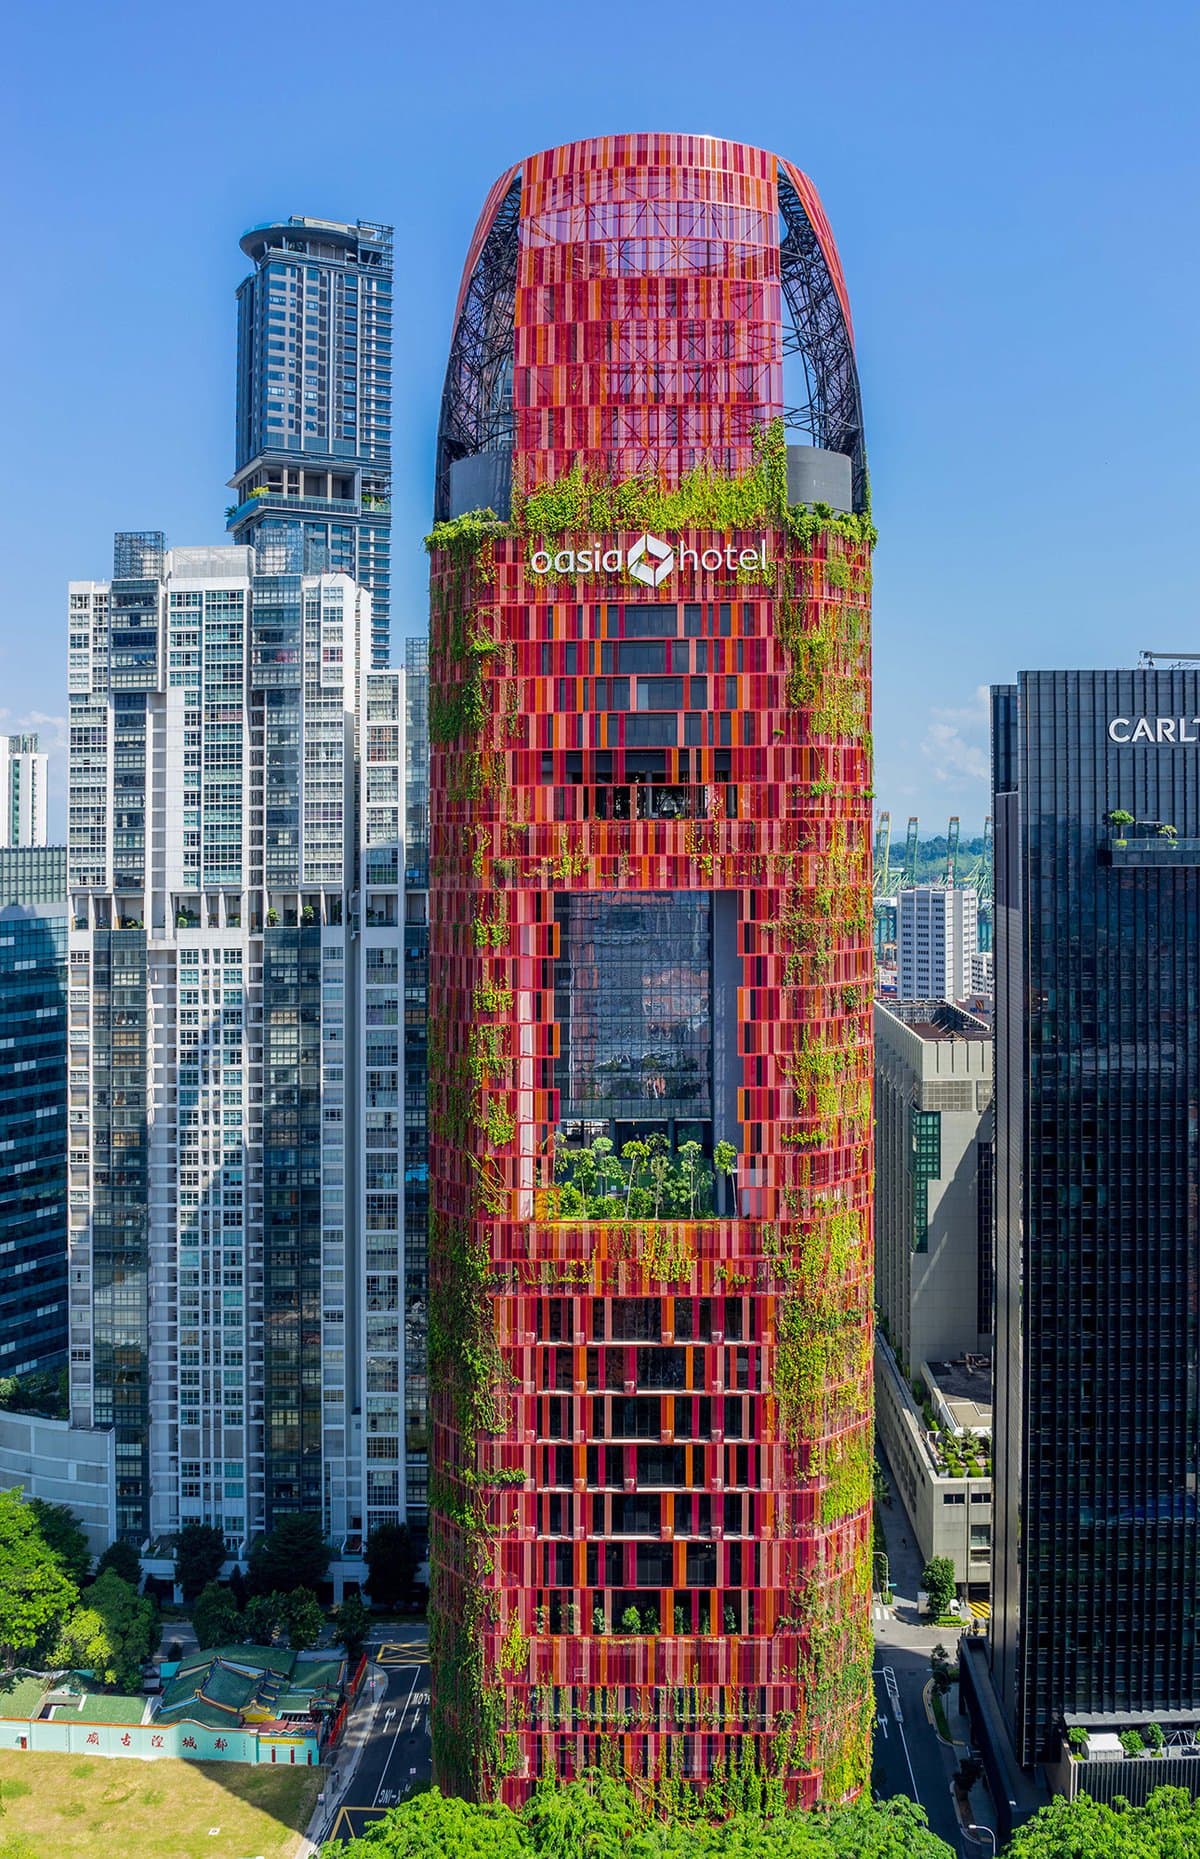 The Best Tall Buildings of 2019, According to the CTBUH